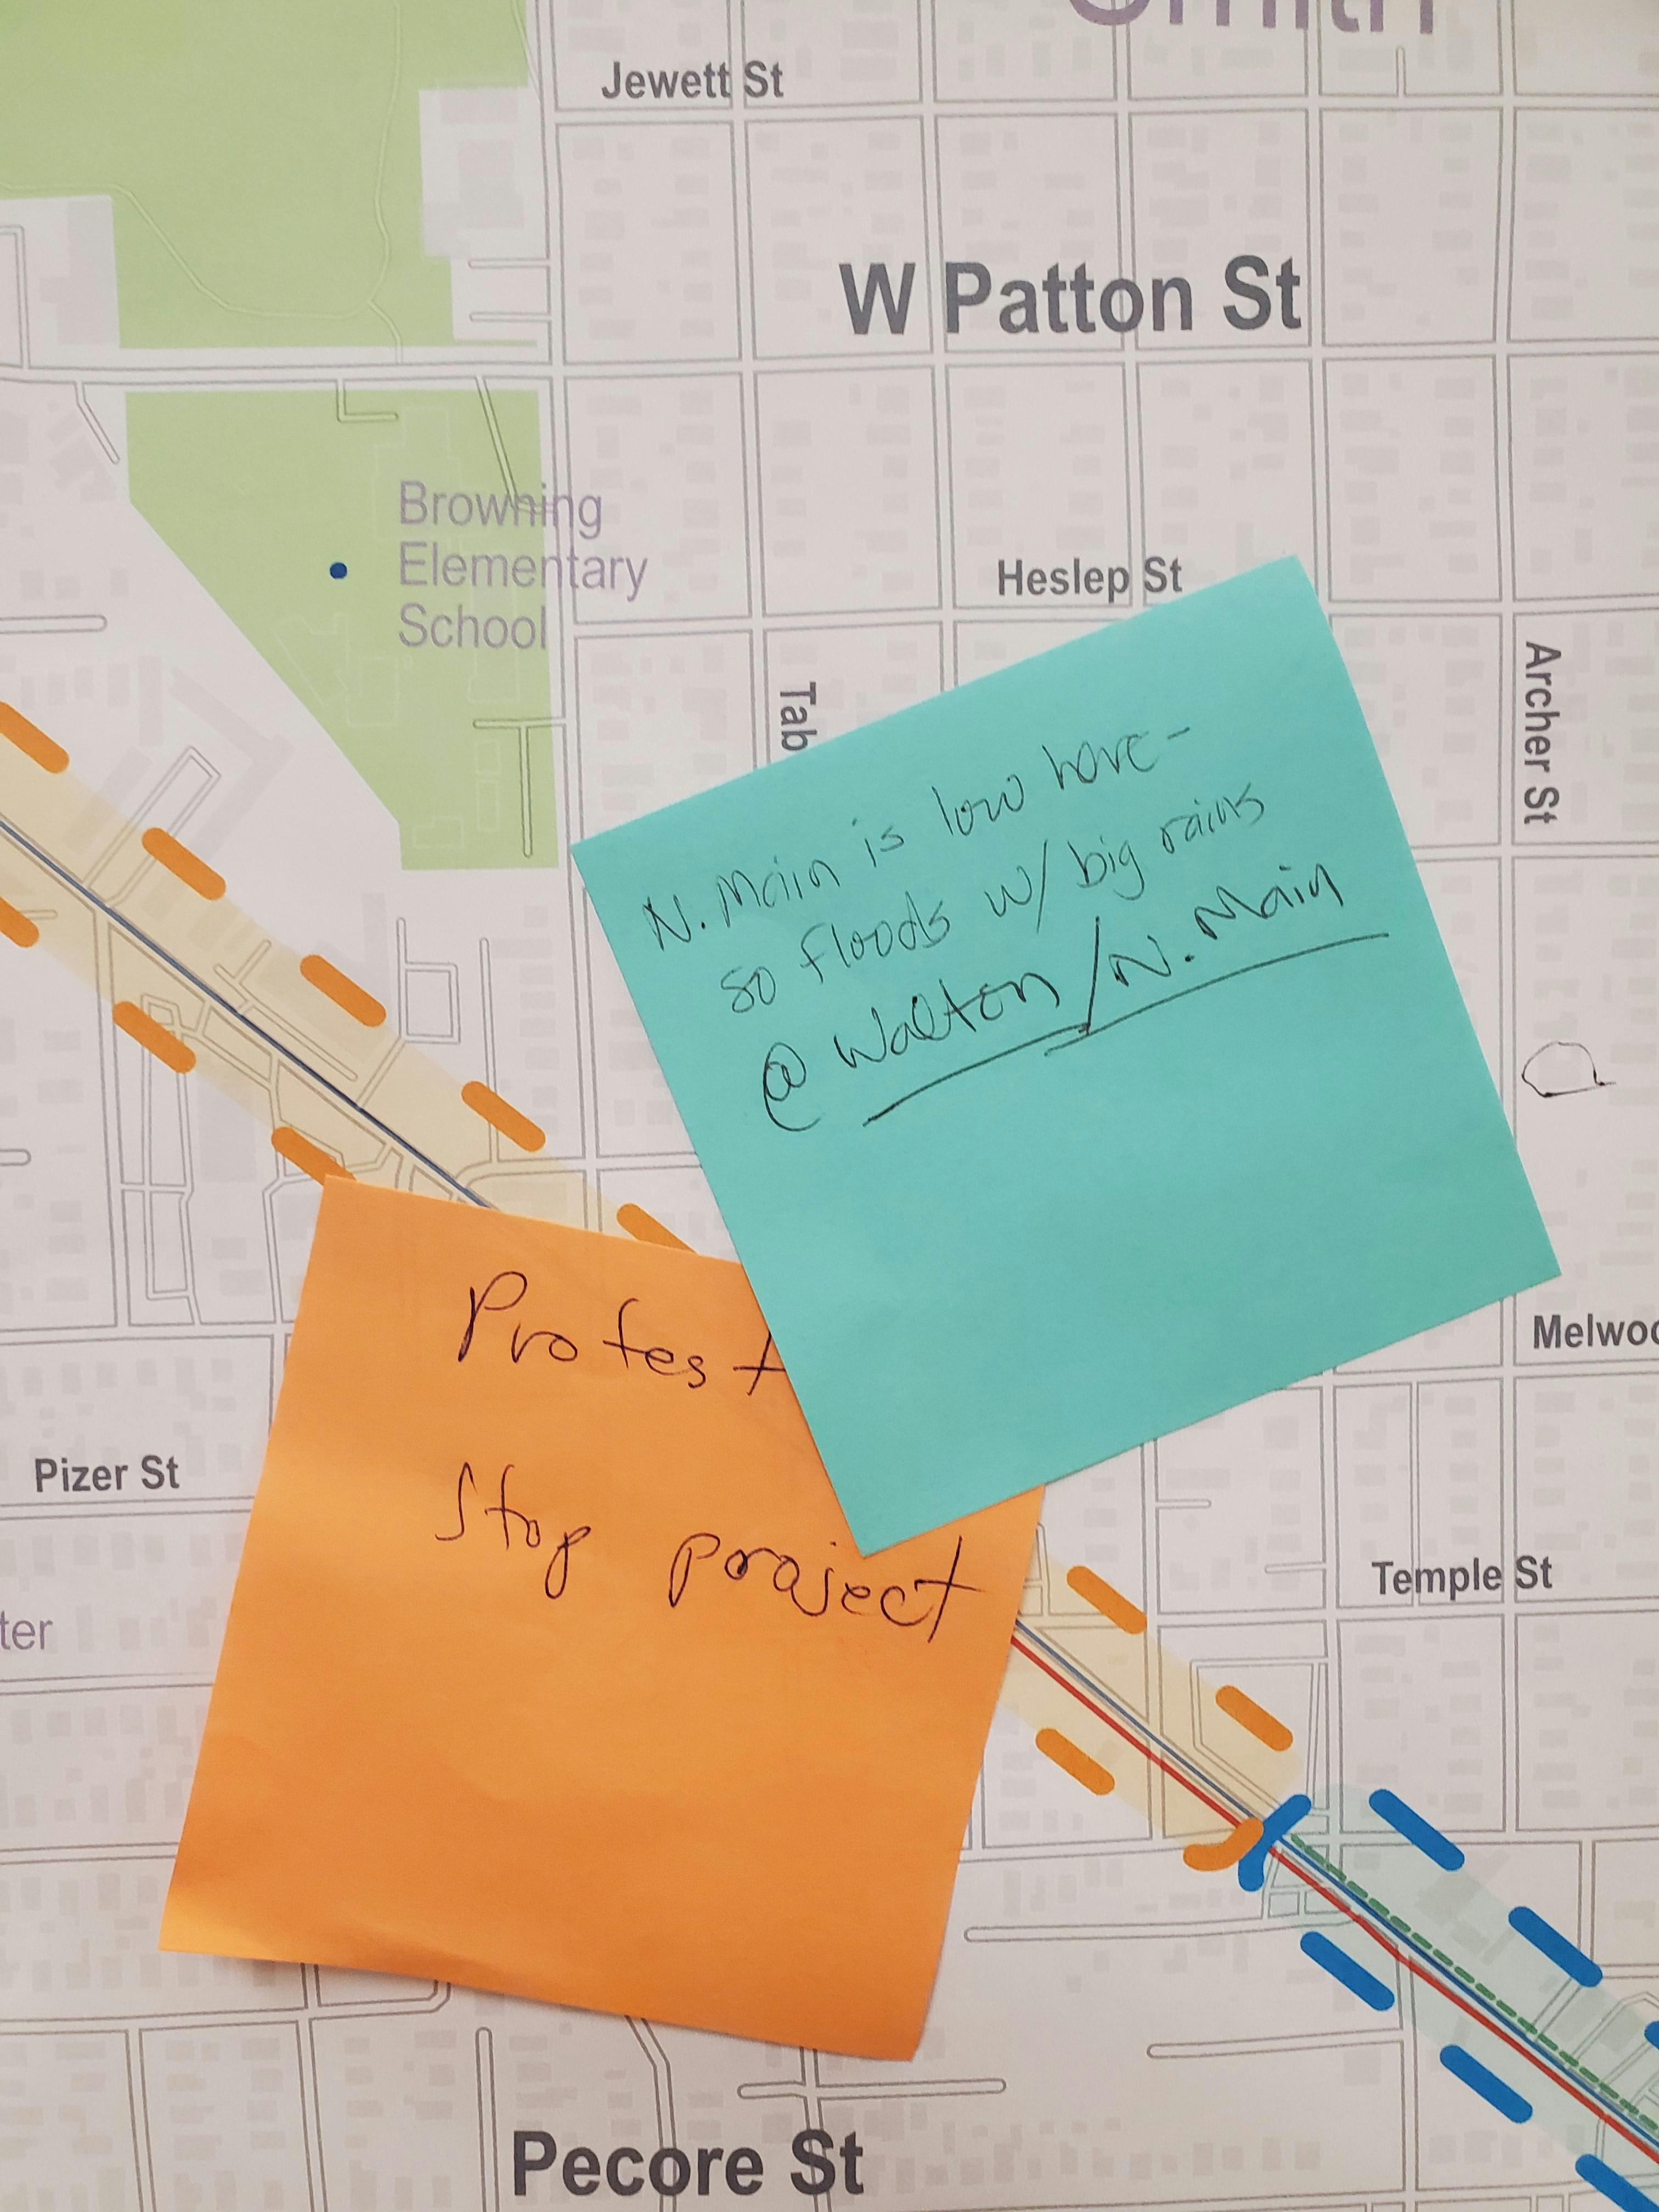 Comments on Proposed Bikeway and Safety Improvements Posterboard 1